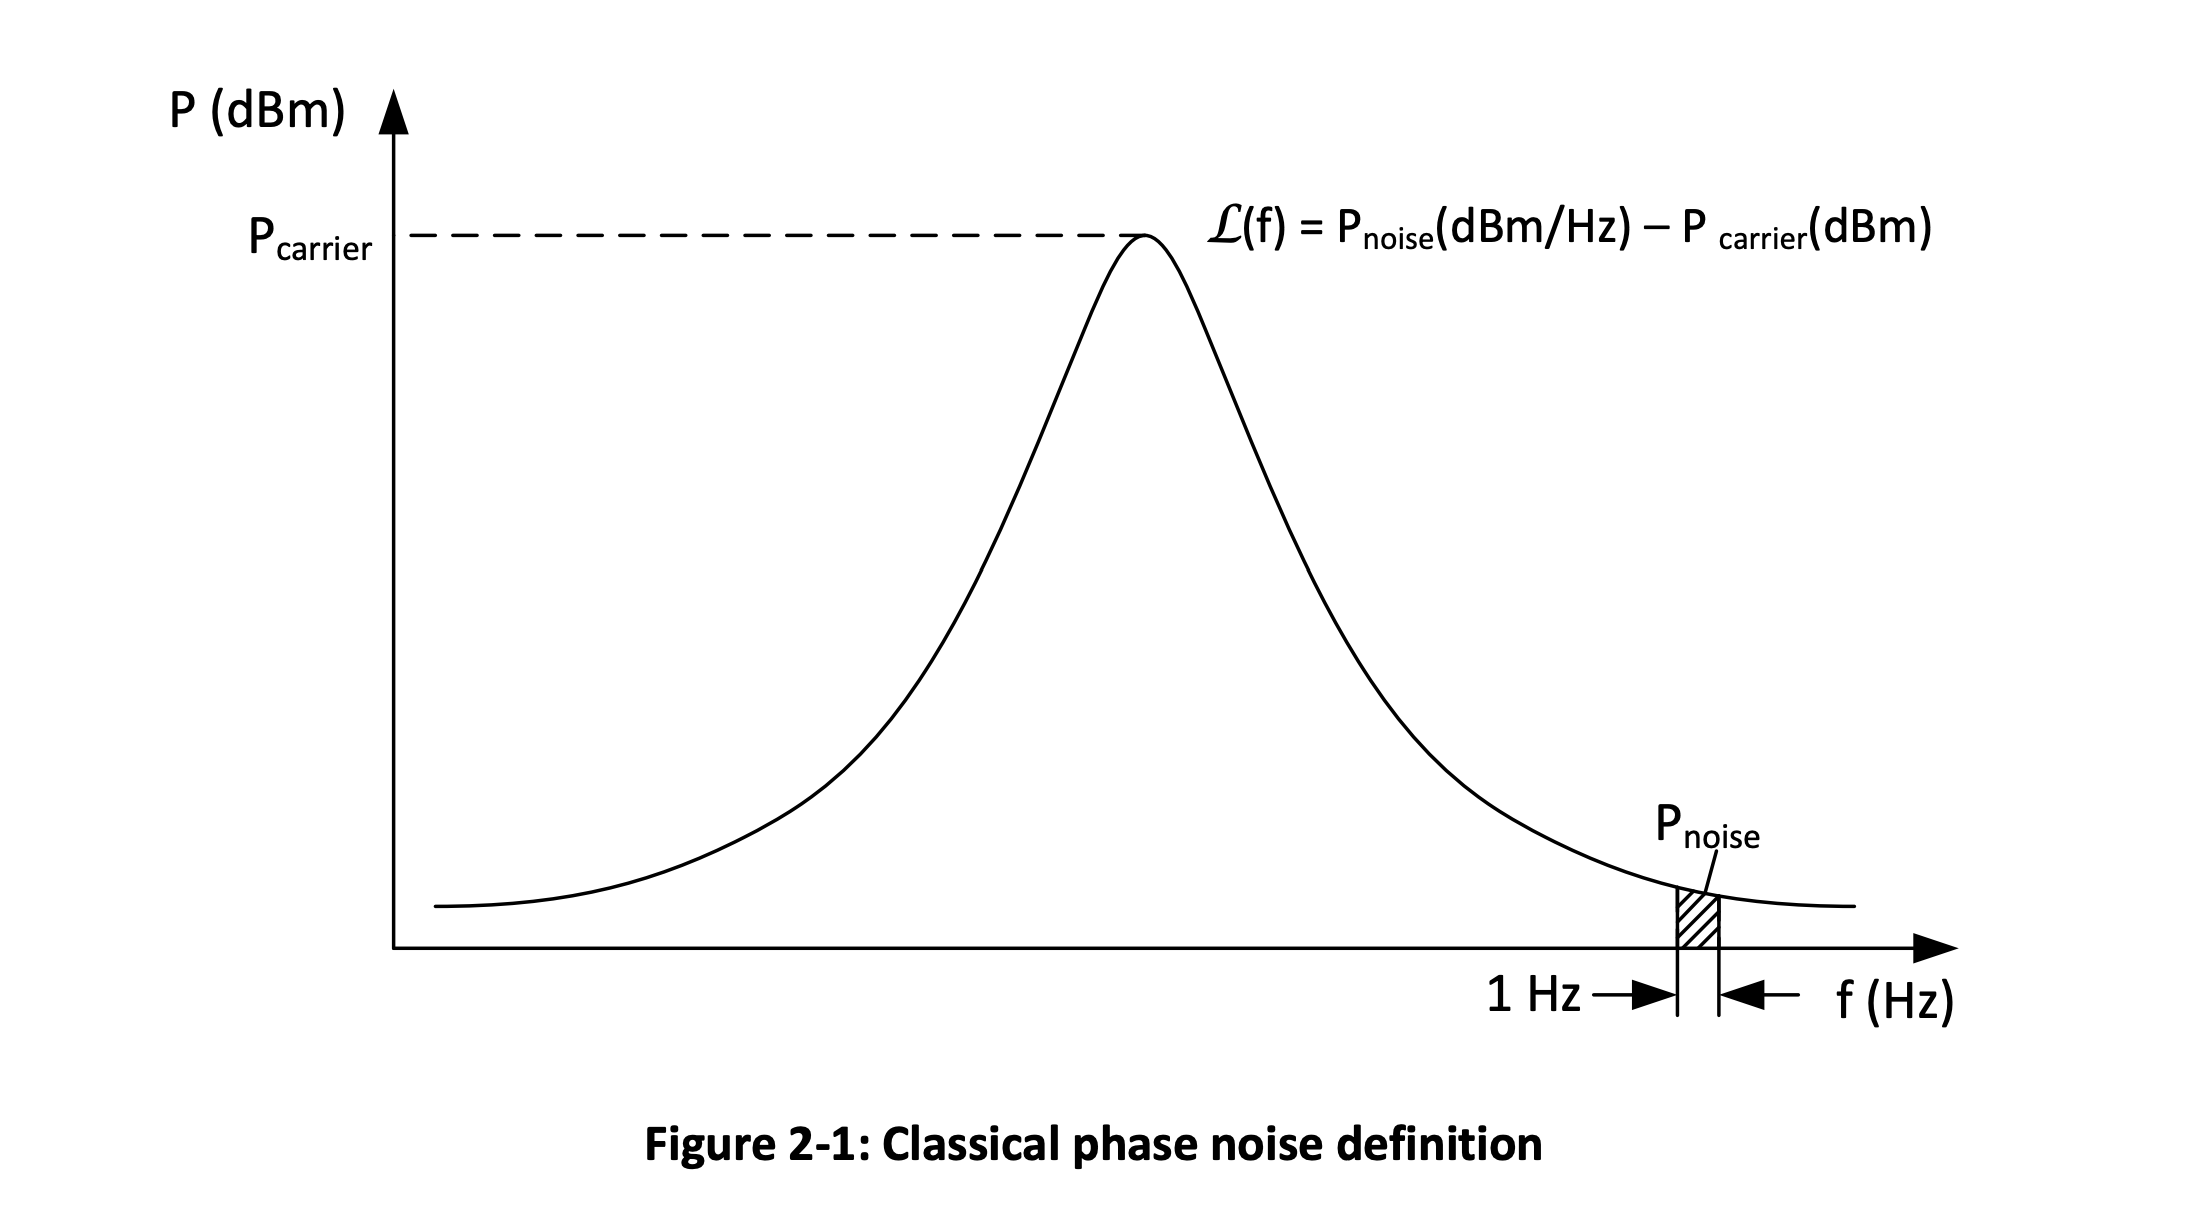 Figure 2-1: Classical Phase Noise Definition